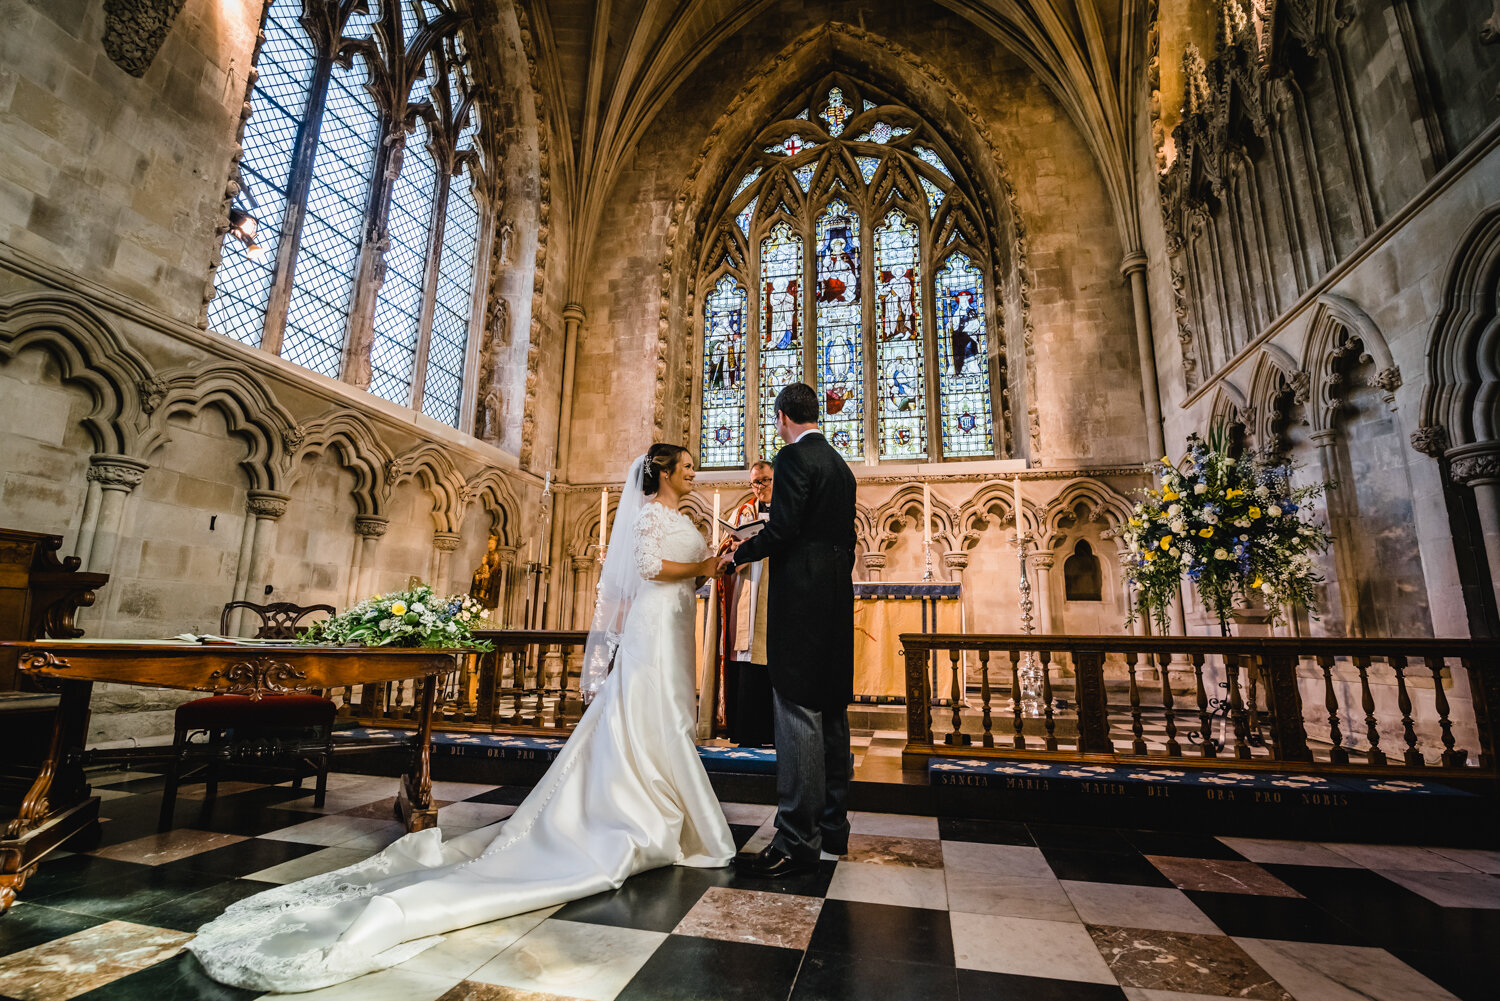 st-albans-cathedral-abbey-wedding-photos-pike-photography-168.jpg